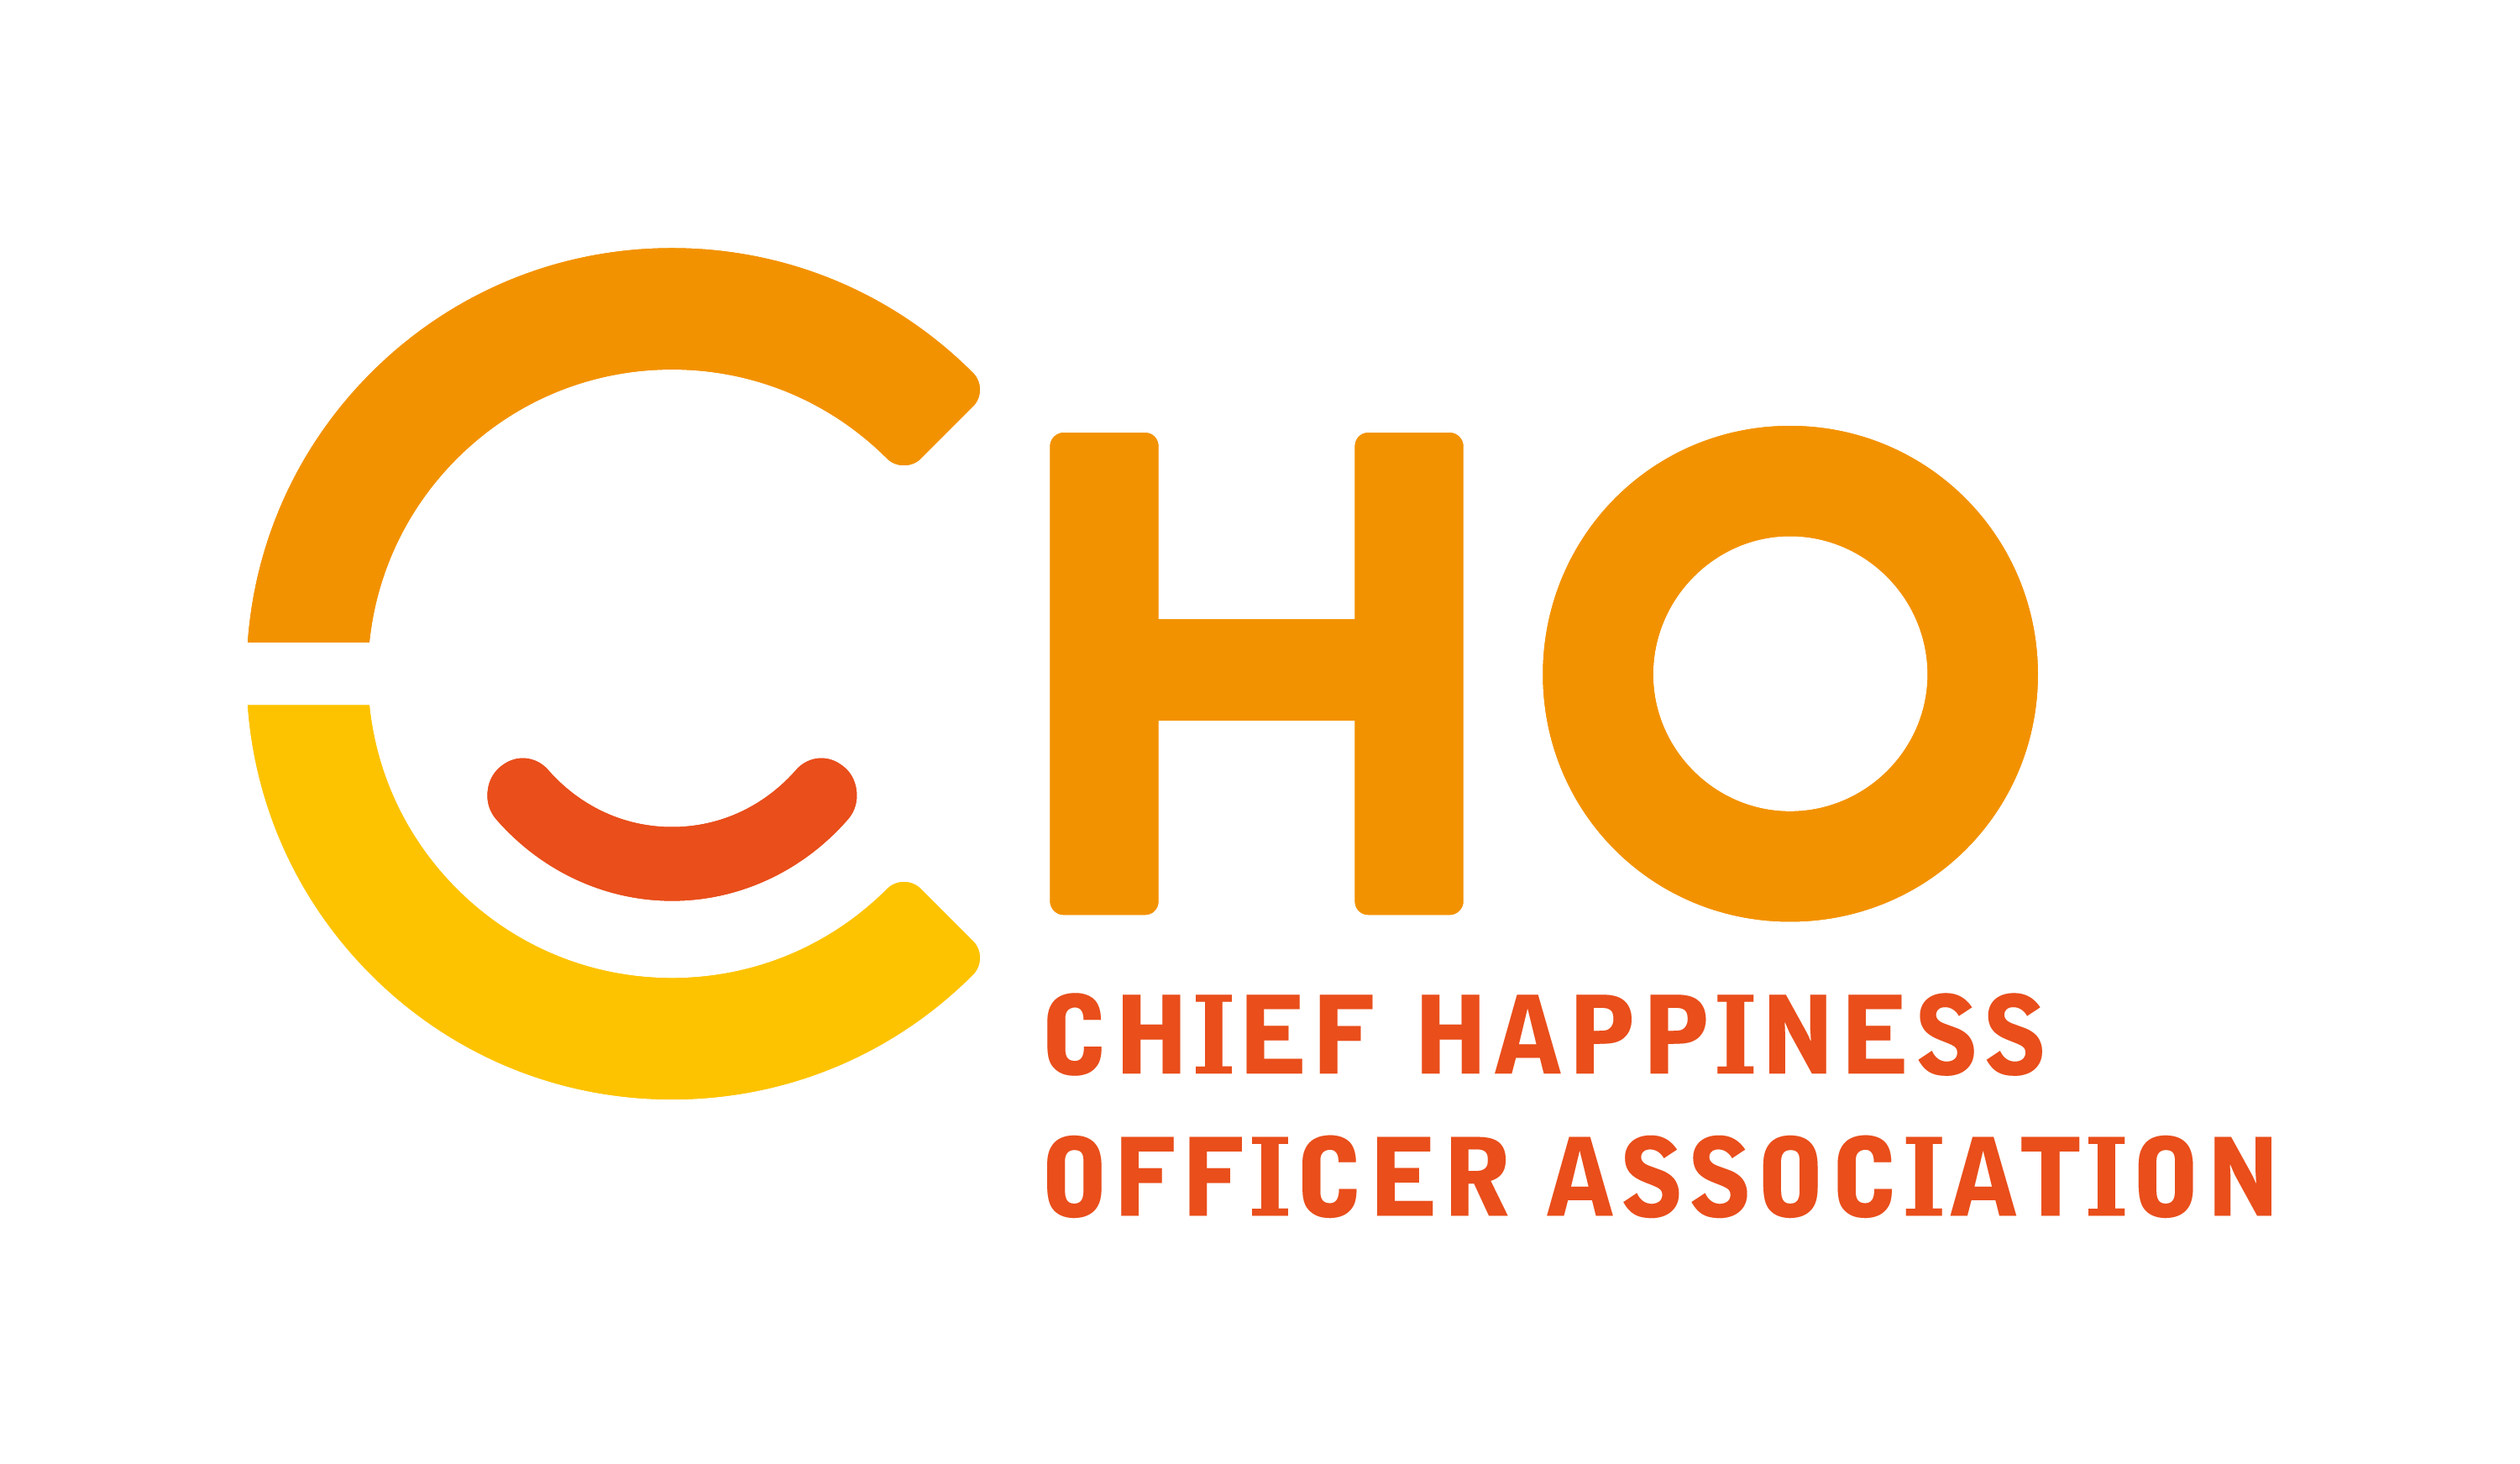 The Chief Happiness Officer Association Limited 首席快樂官協會